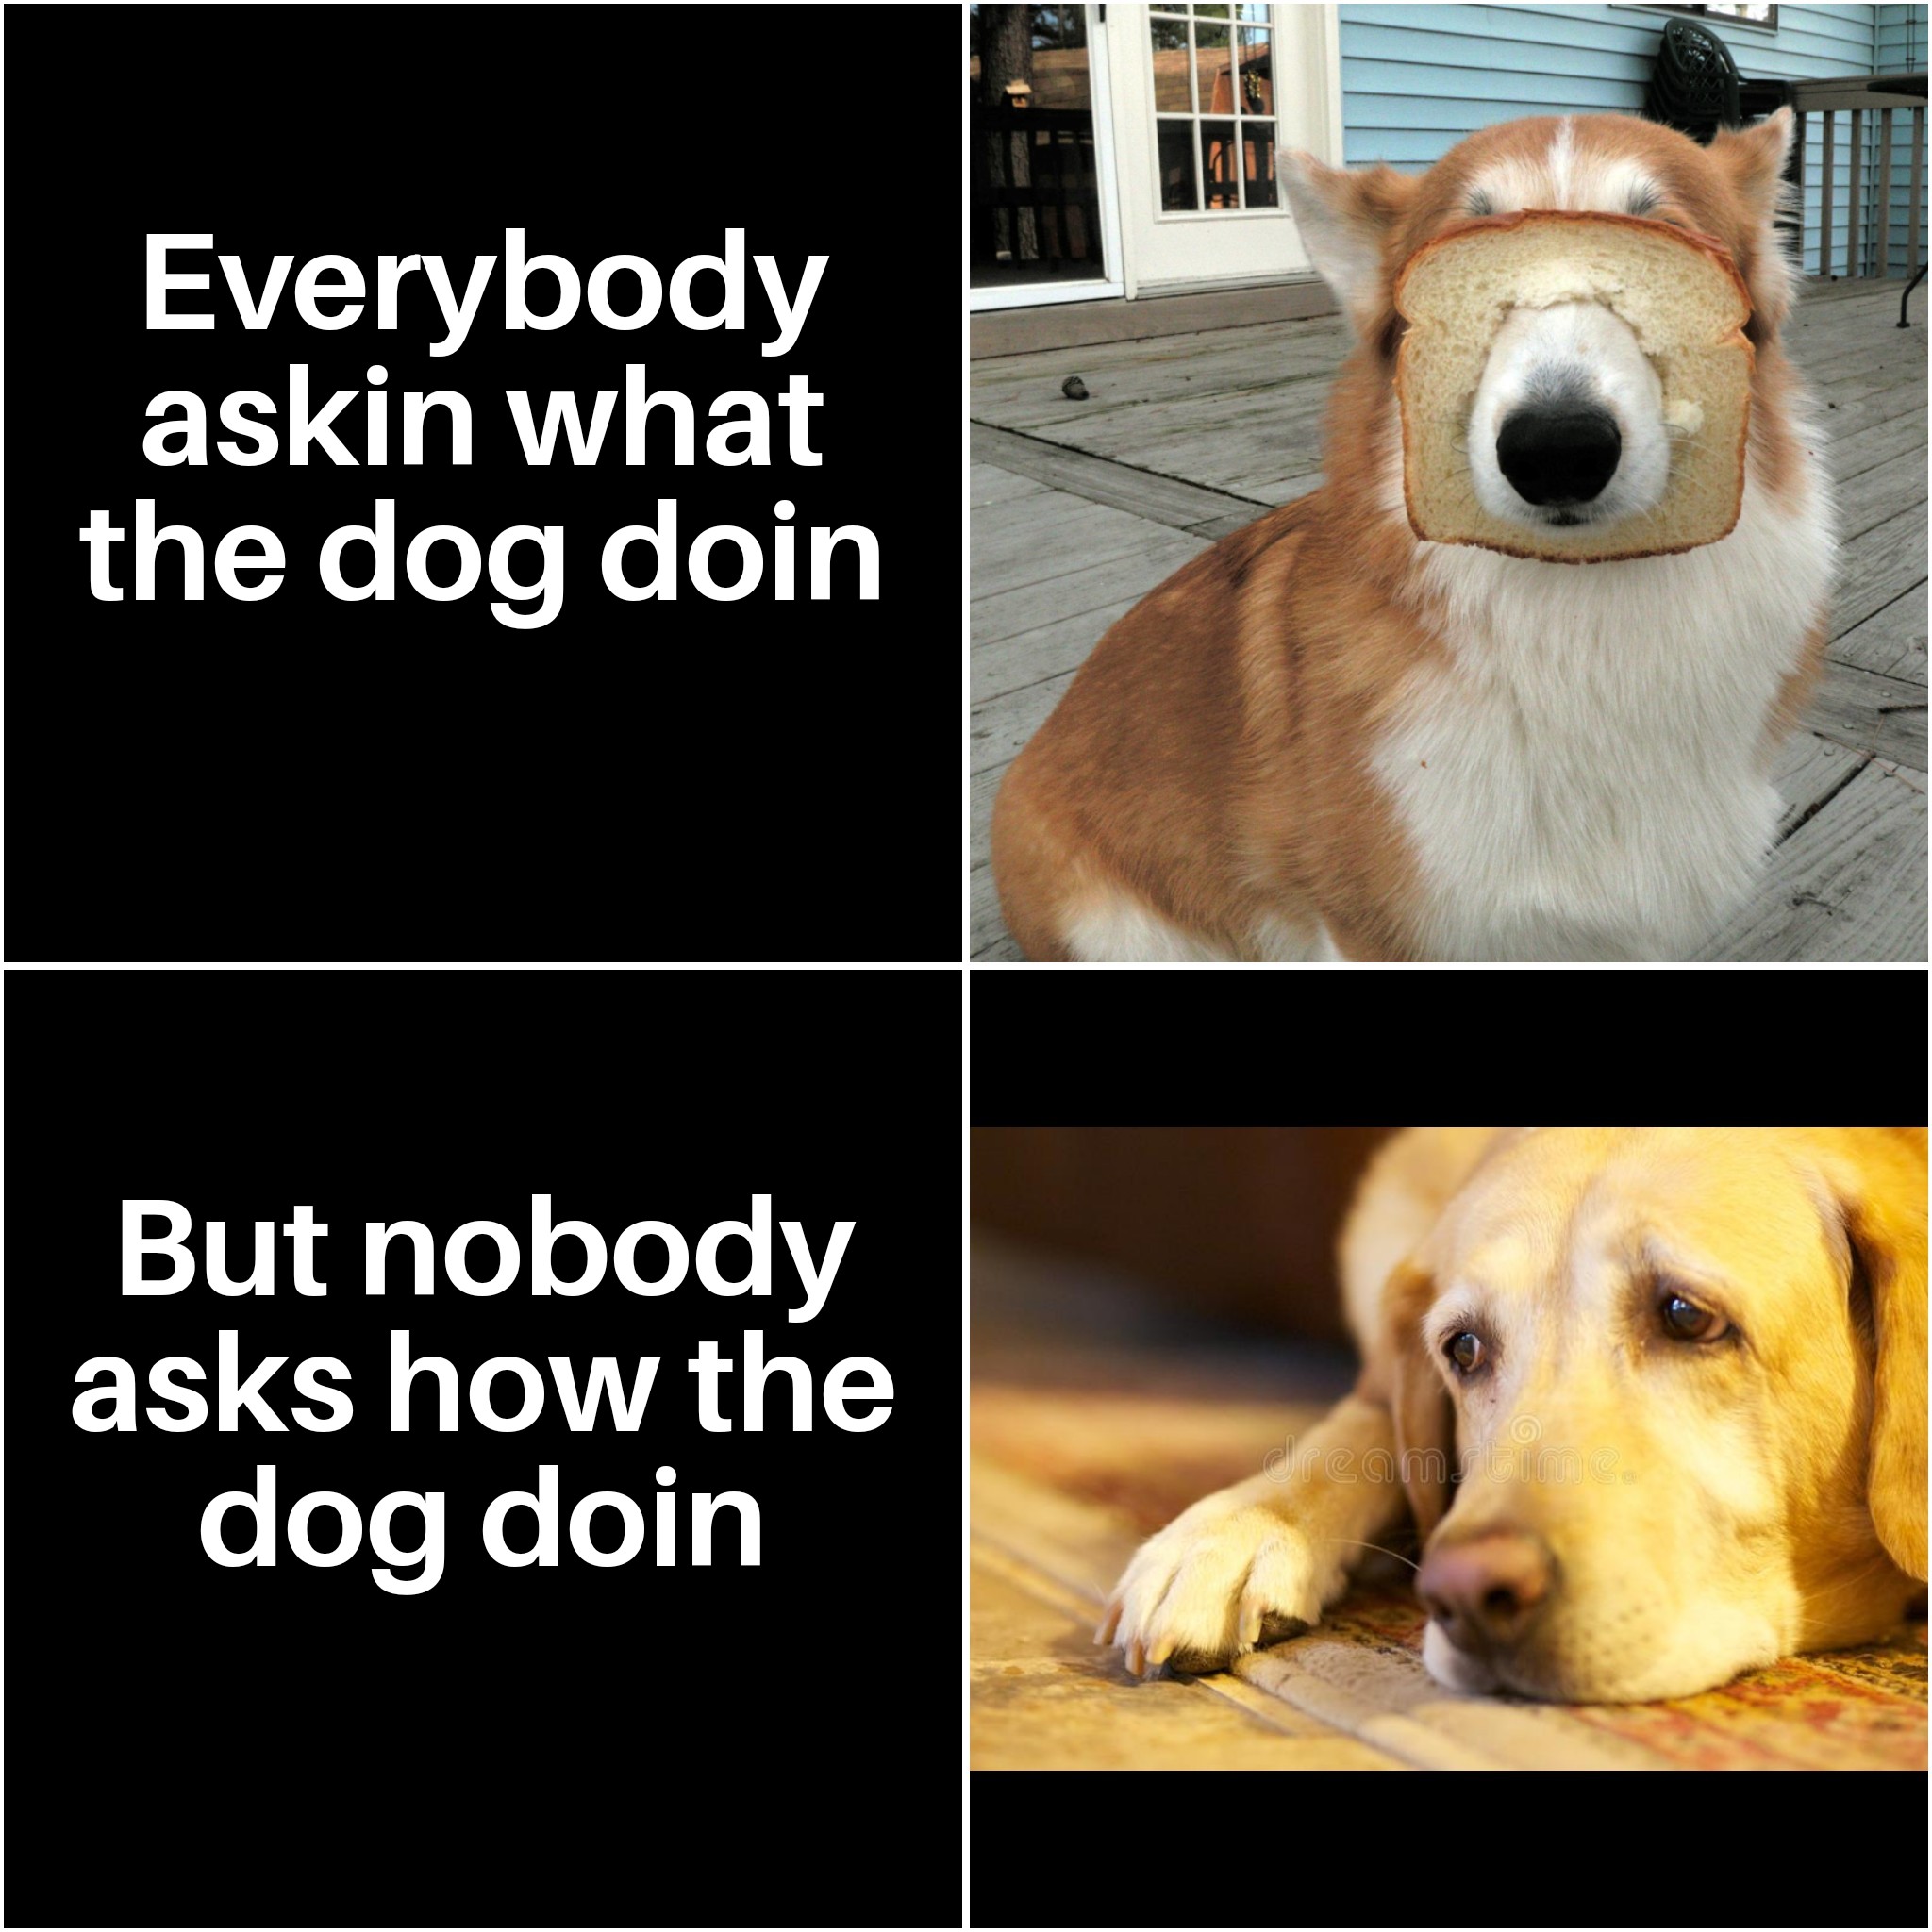 daily dose of memes - Dog - Everybody askin what the dog doin But nobody asks how the dog doin